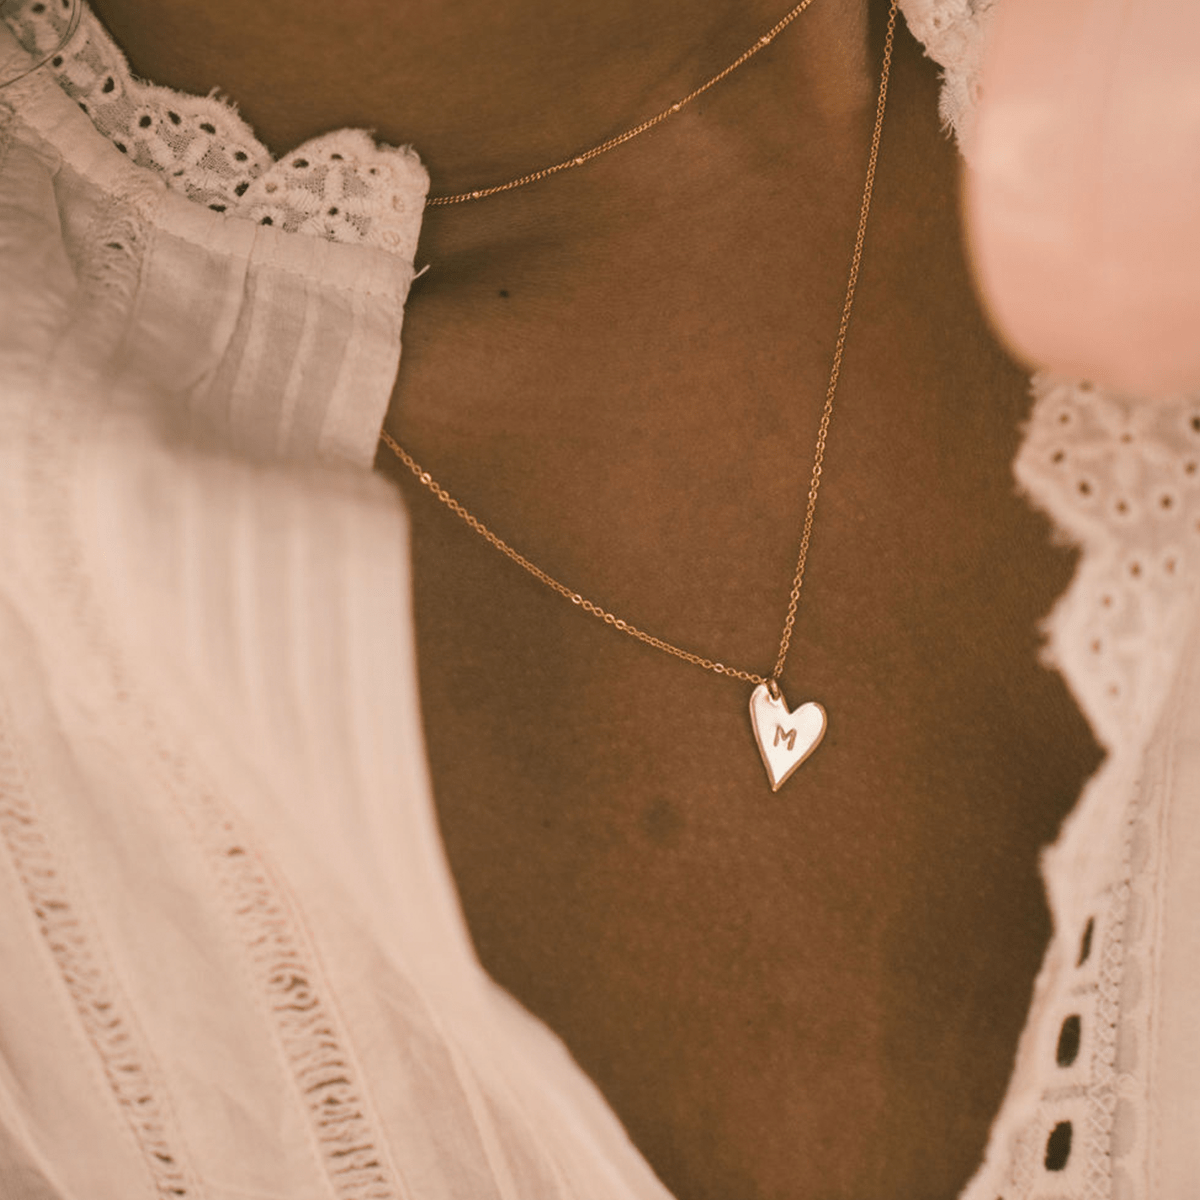 Buy Heart Initial Necklace, Best Friend Necklace, Initial Necklace Gold,  Dainty Initial Necklace, Heart Necklace With Initial, Letter Necklace  Online in India - Etsy